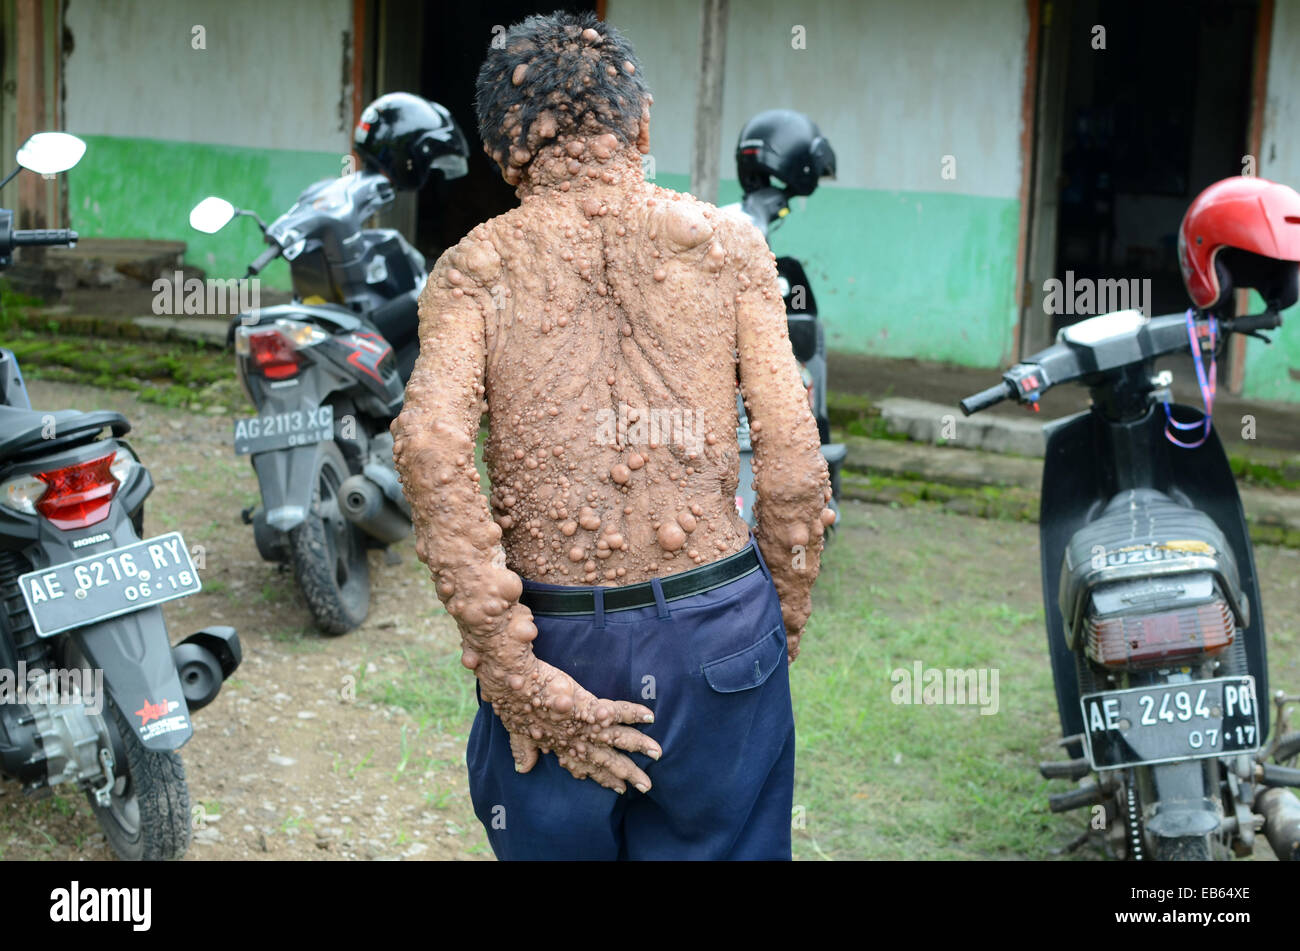 Slamet, 59, is believed to be suffering from neurofibromatosis. Genetic condition which causes uncontrollable growths along the Stock Photo